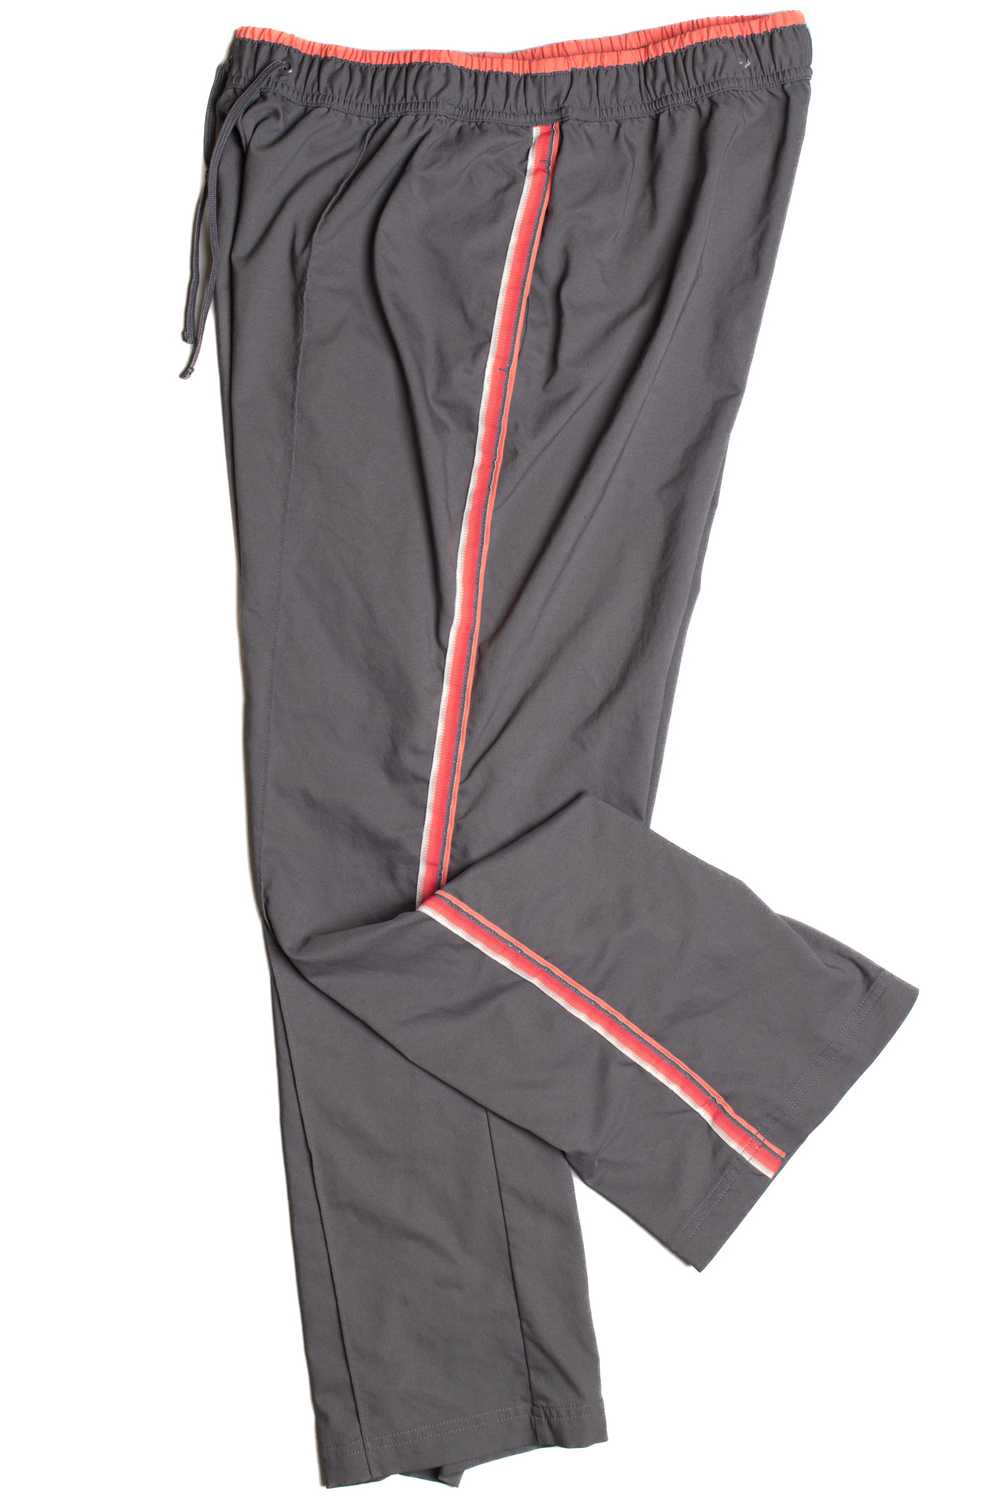 Made for Life Track Pants 985 - image 2